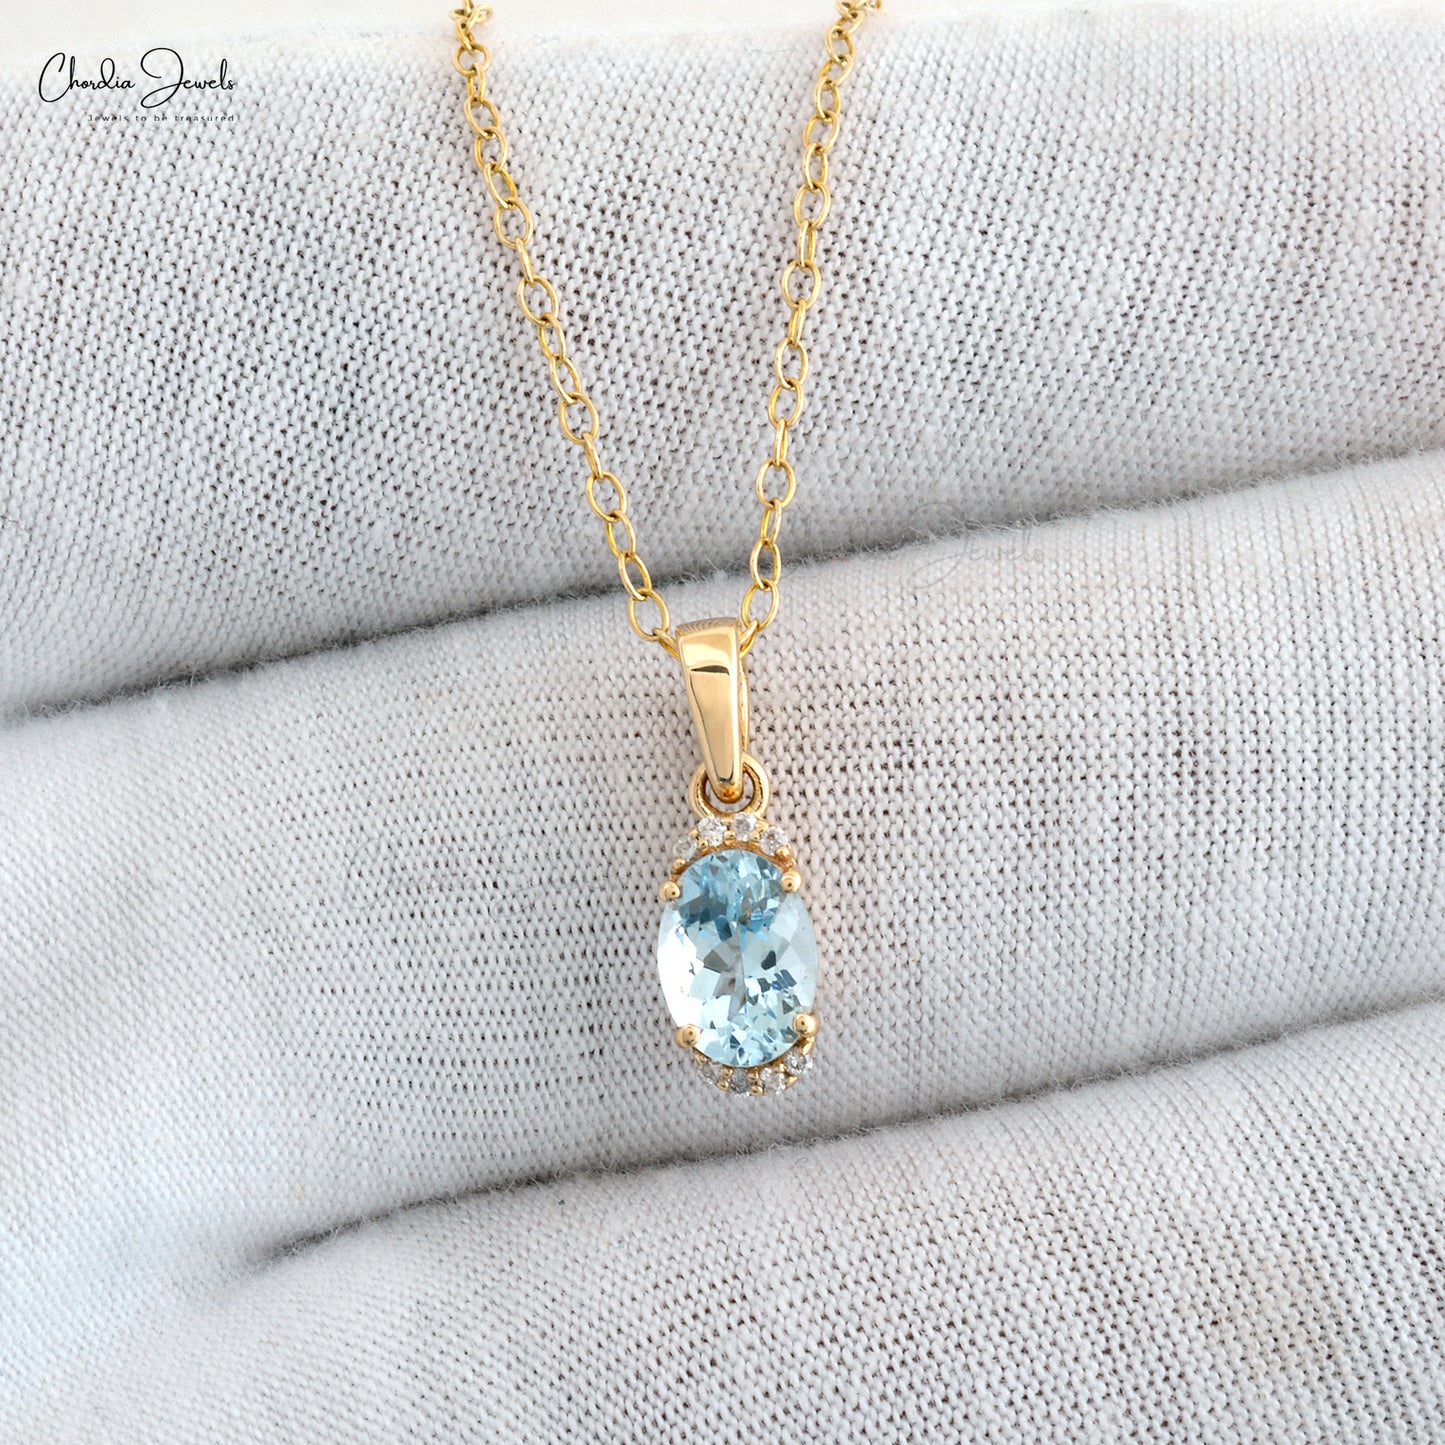 Designer Half Halo Pendant Necklace With 0.75 Ct Natural Aquamarine and White Diamond in 14k Real Gold Wedding Gift For Her